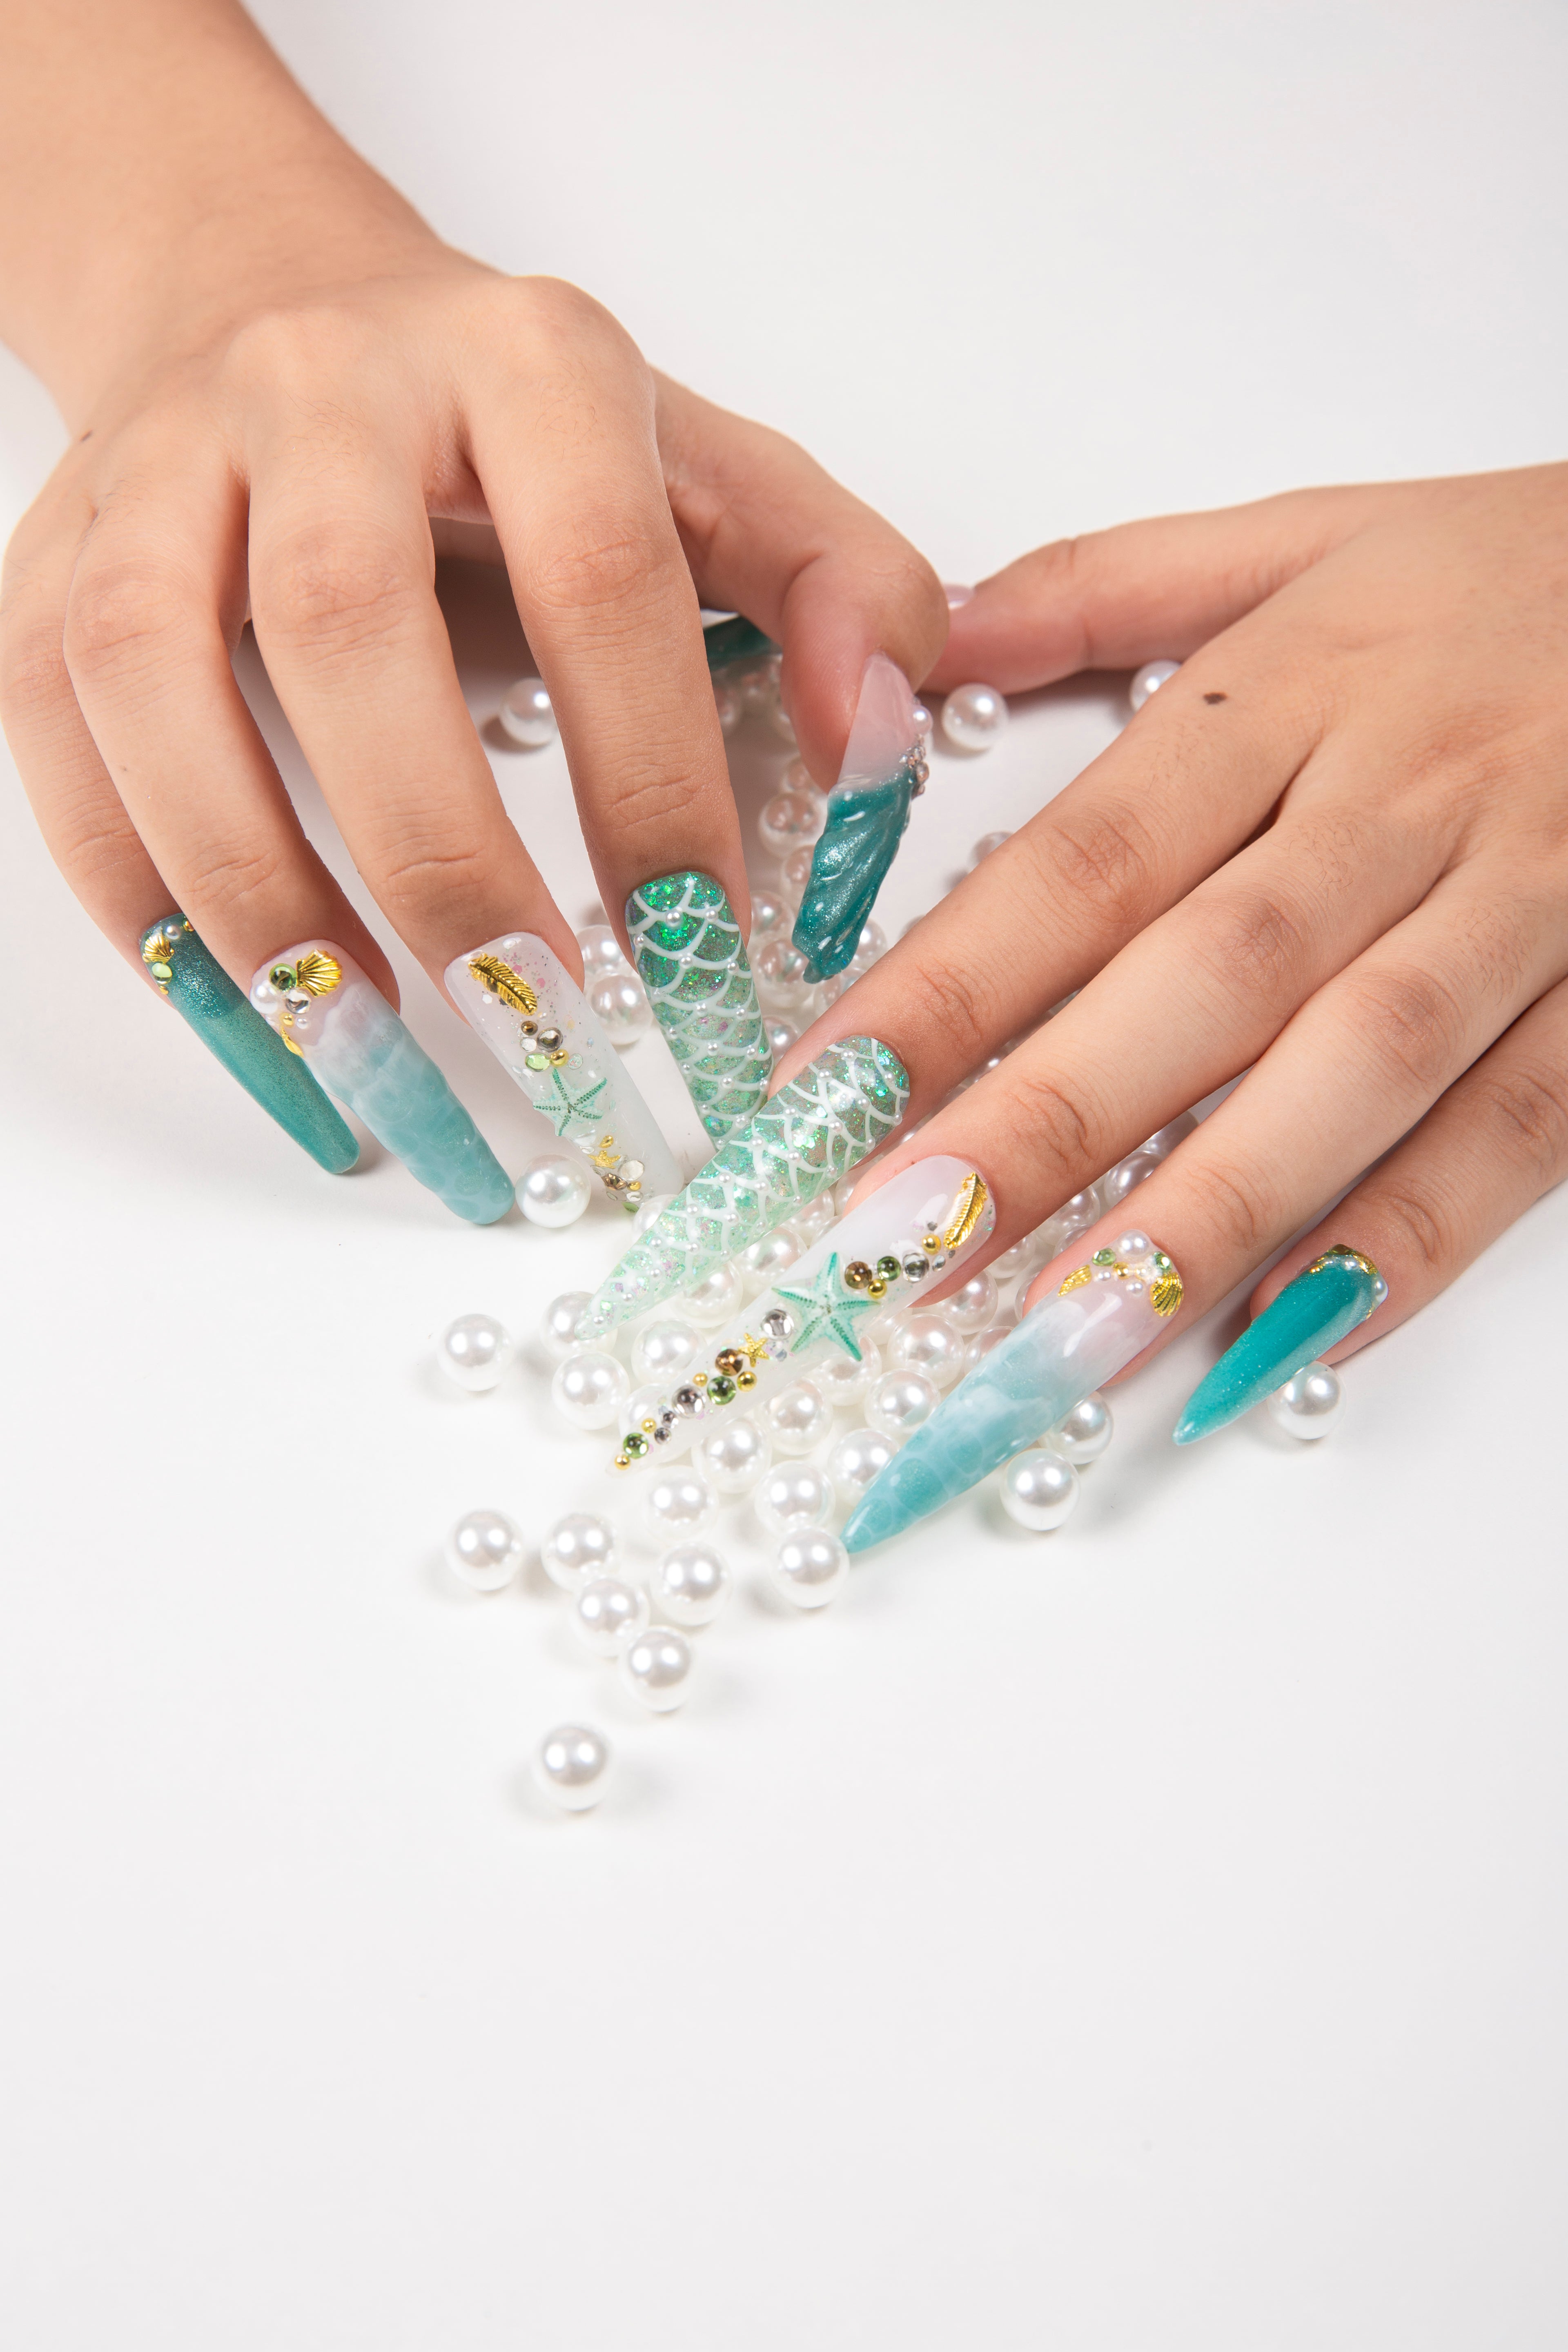 Hands with Surfing Girls press-on nails by Lovful, showcasing Hawaii sea blue base color, starfish, glitter accents, and scattered pearls on a white surface.